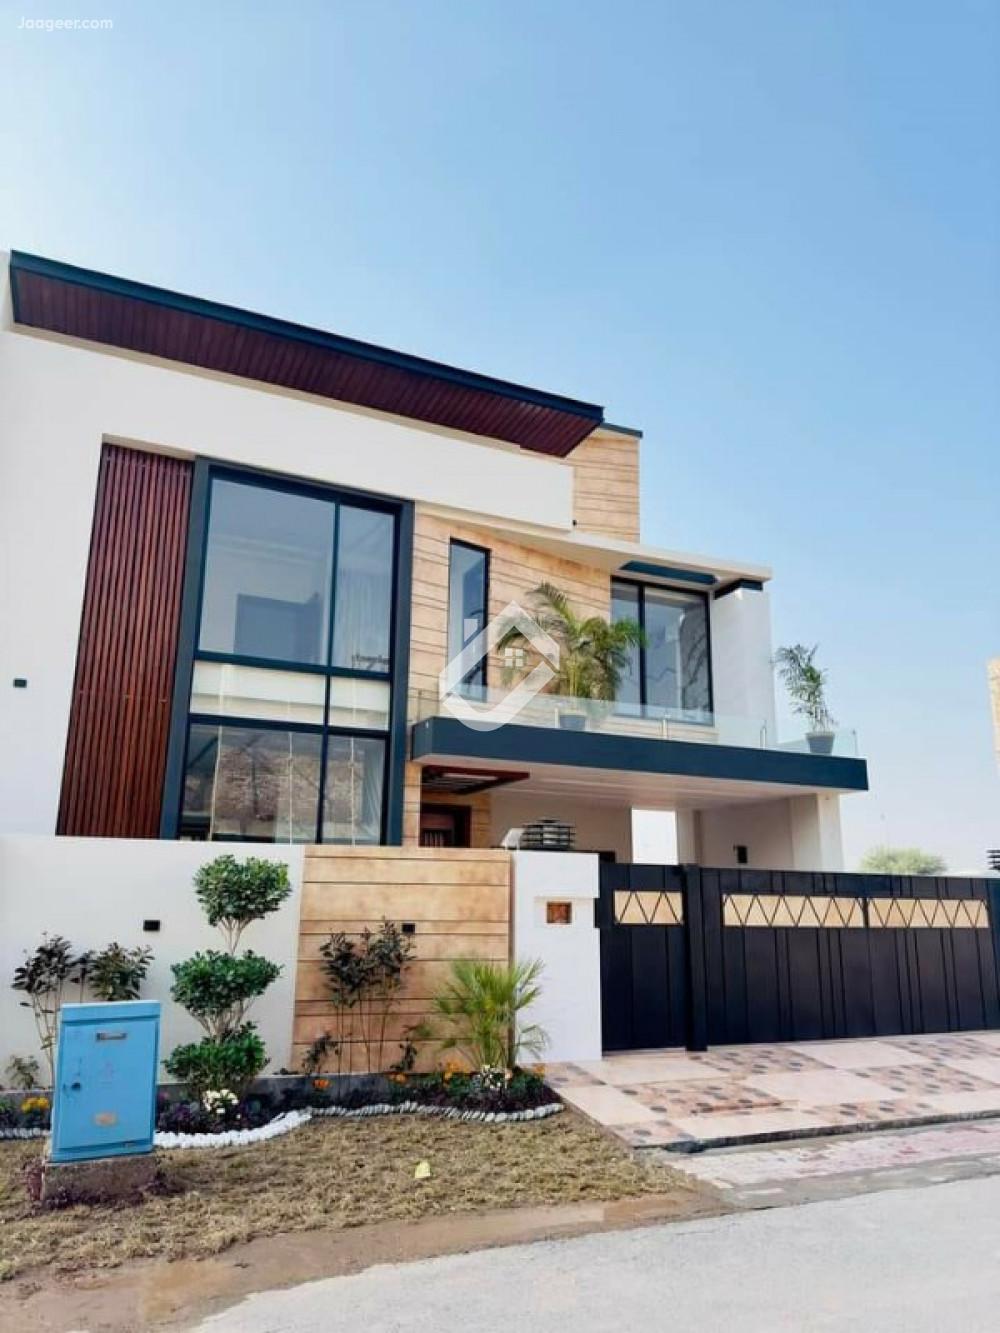 Main image 12 Marla Double Storey House For Sale In Royal Orchard Royal Orchard, Multan